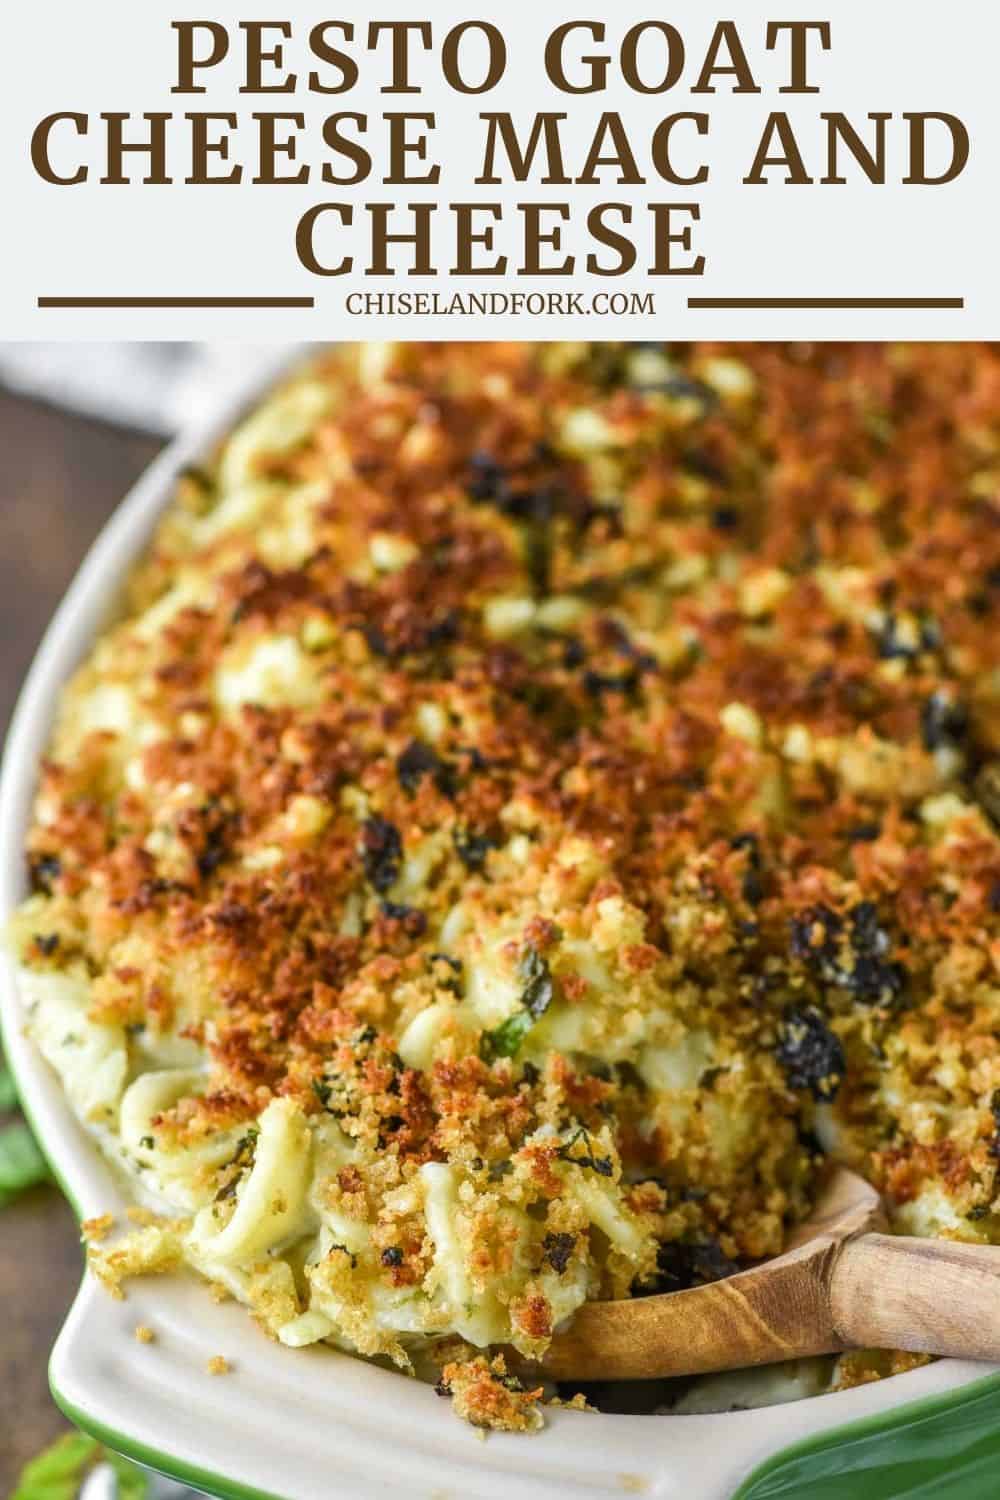 Pesto Goat Cheese Mac and Cheese - Chisel & Fork